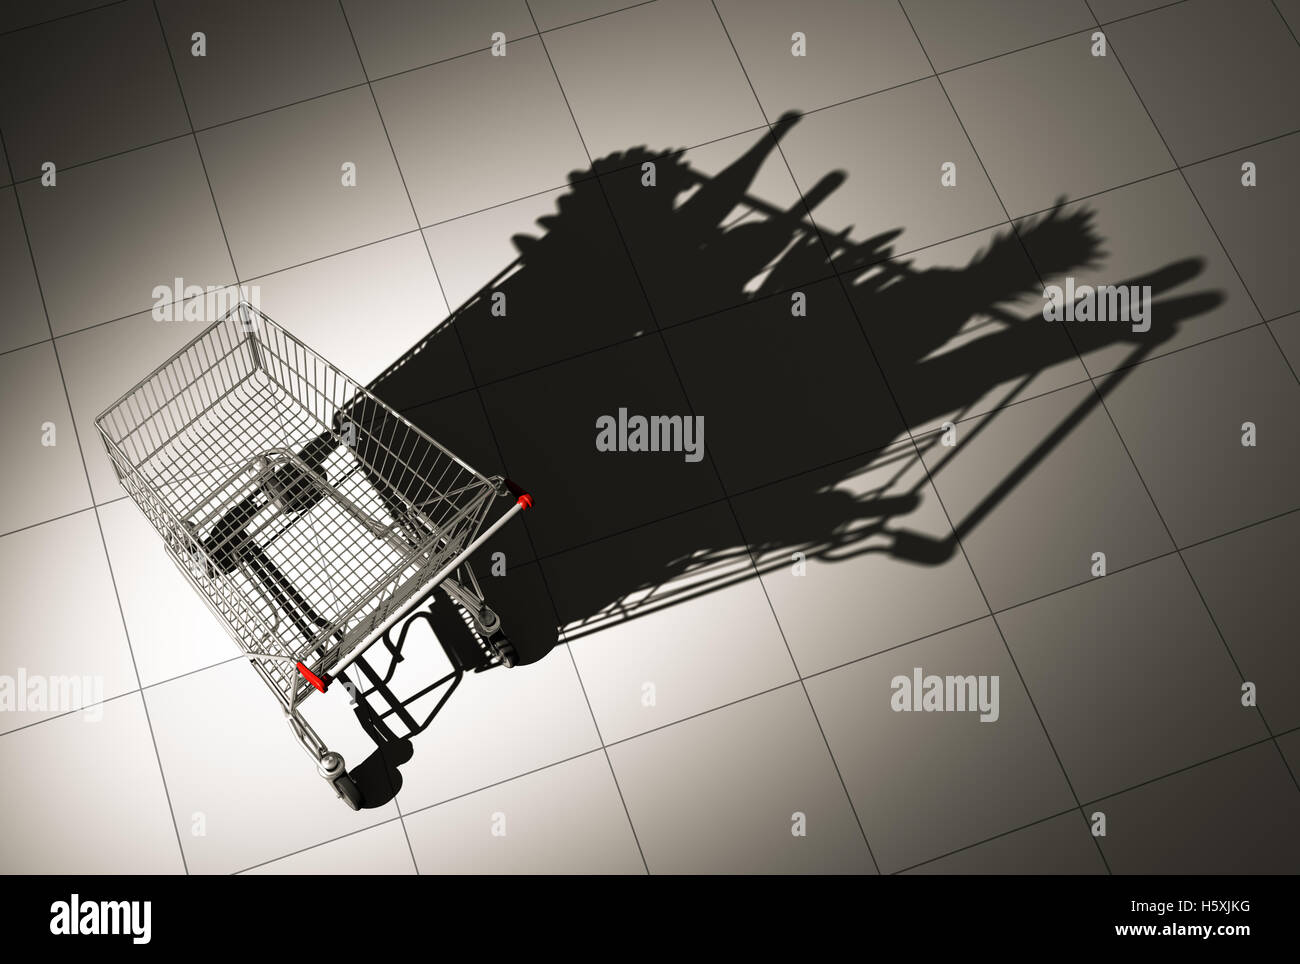 Empty Shopping Cart Cast Shadow On The Floor As Shopping Cart Full Of Food Stock Photo